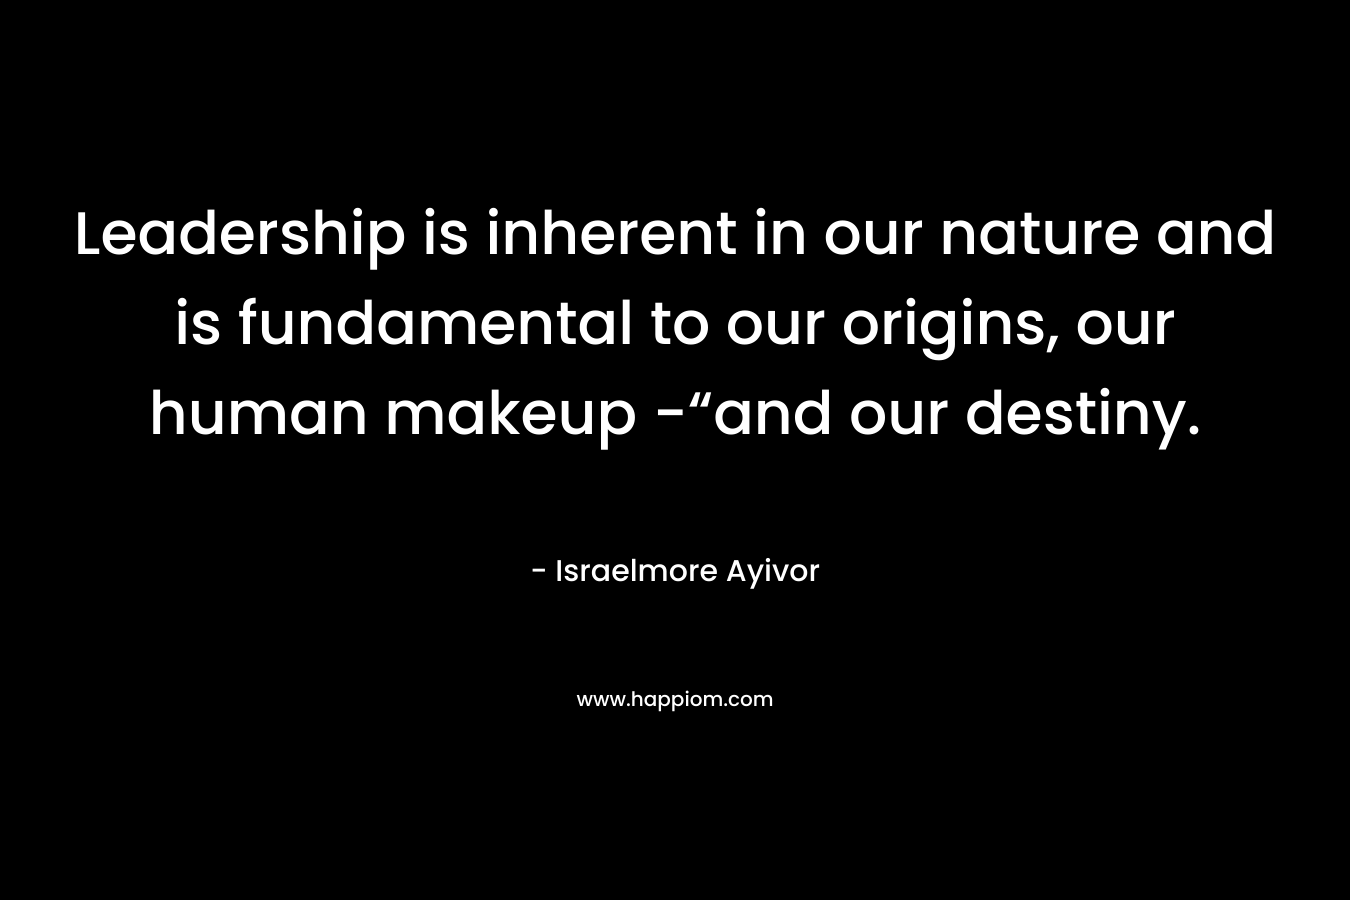 Leadership is inherent in our nature and is fundamental to our origins, our human makeup -“and our destiny.